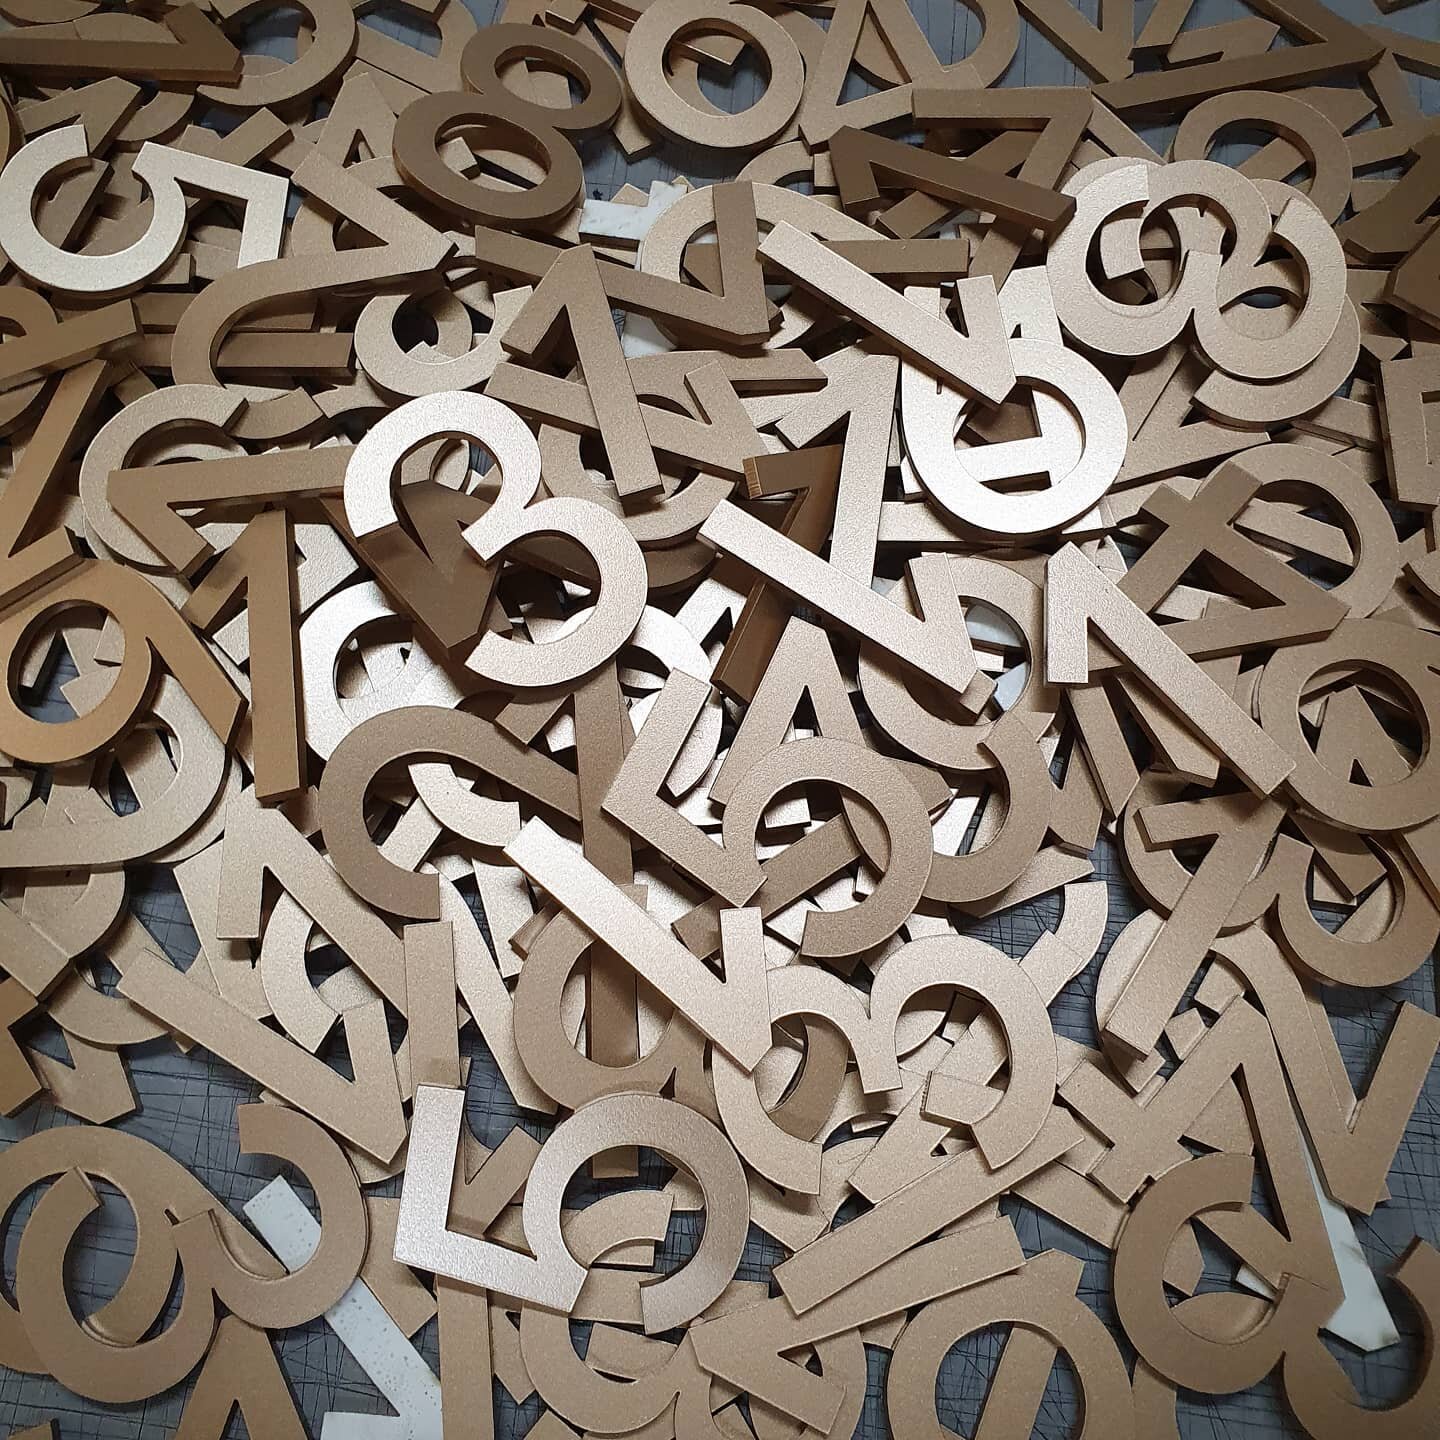 Lots n lots n lots of numbers!!
These acrylic letters have all been cut and sprayed in house then dropped of to @signaramasurryhills to do the hard work